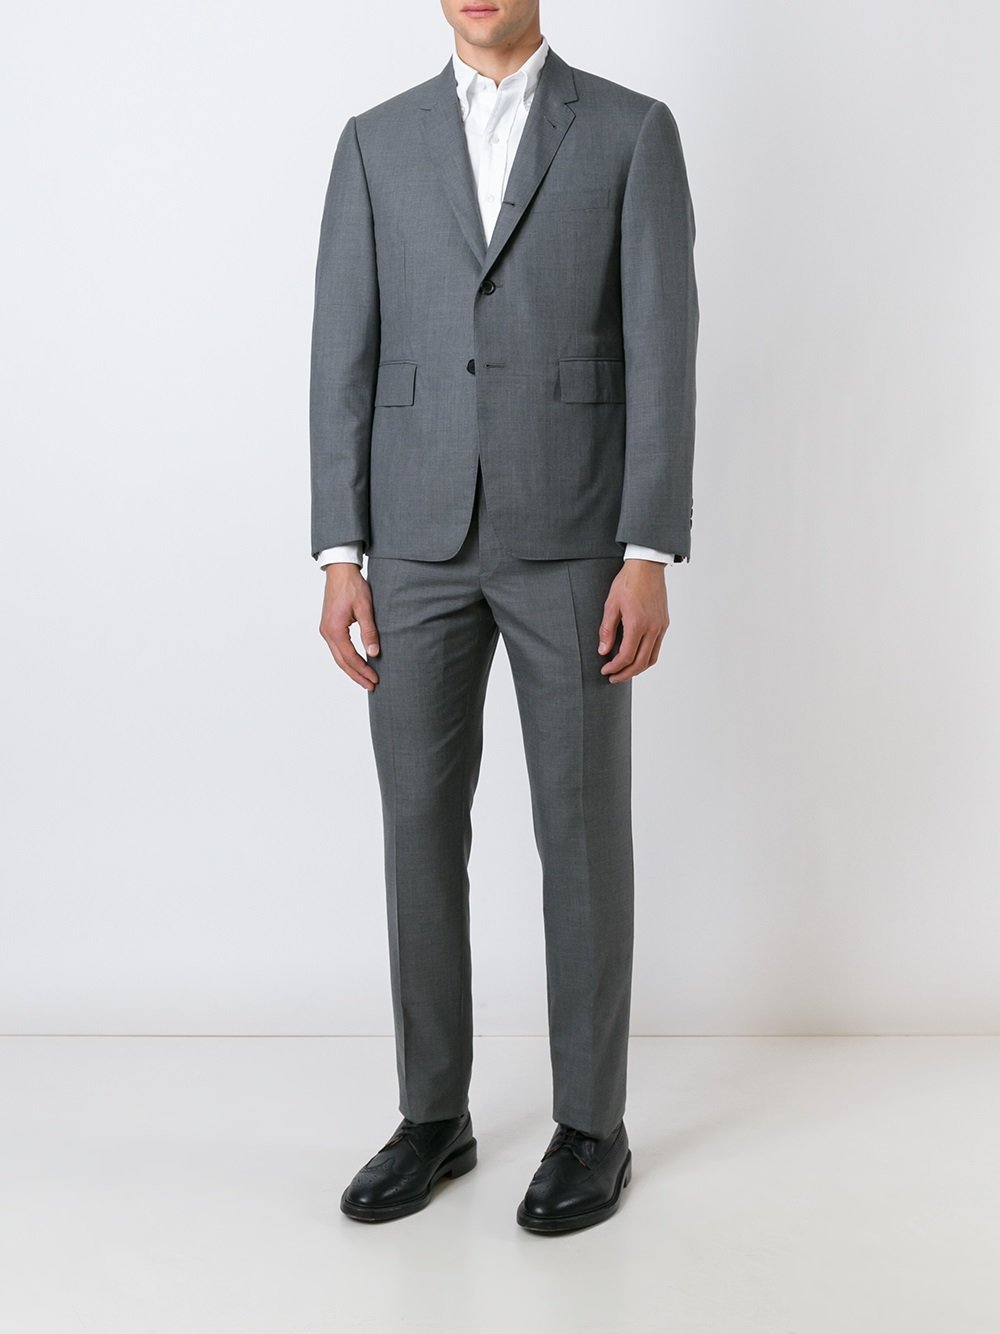 Thom Browne High Armhole Plain Weave Suit In Super 120s Wool, $2,500 ...